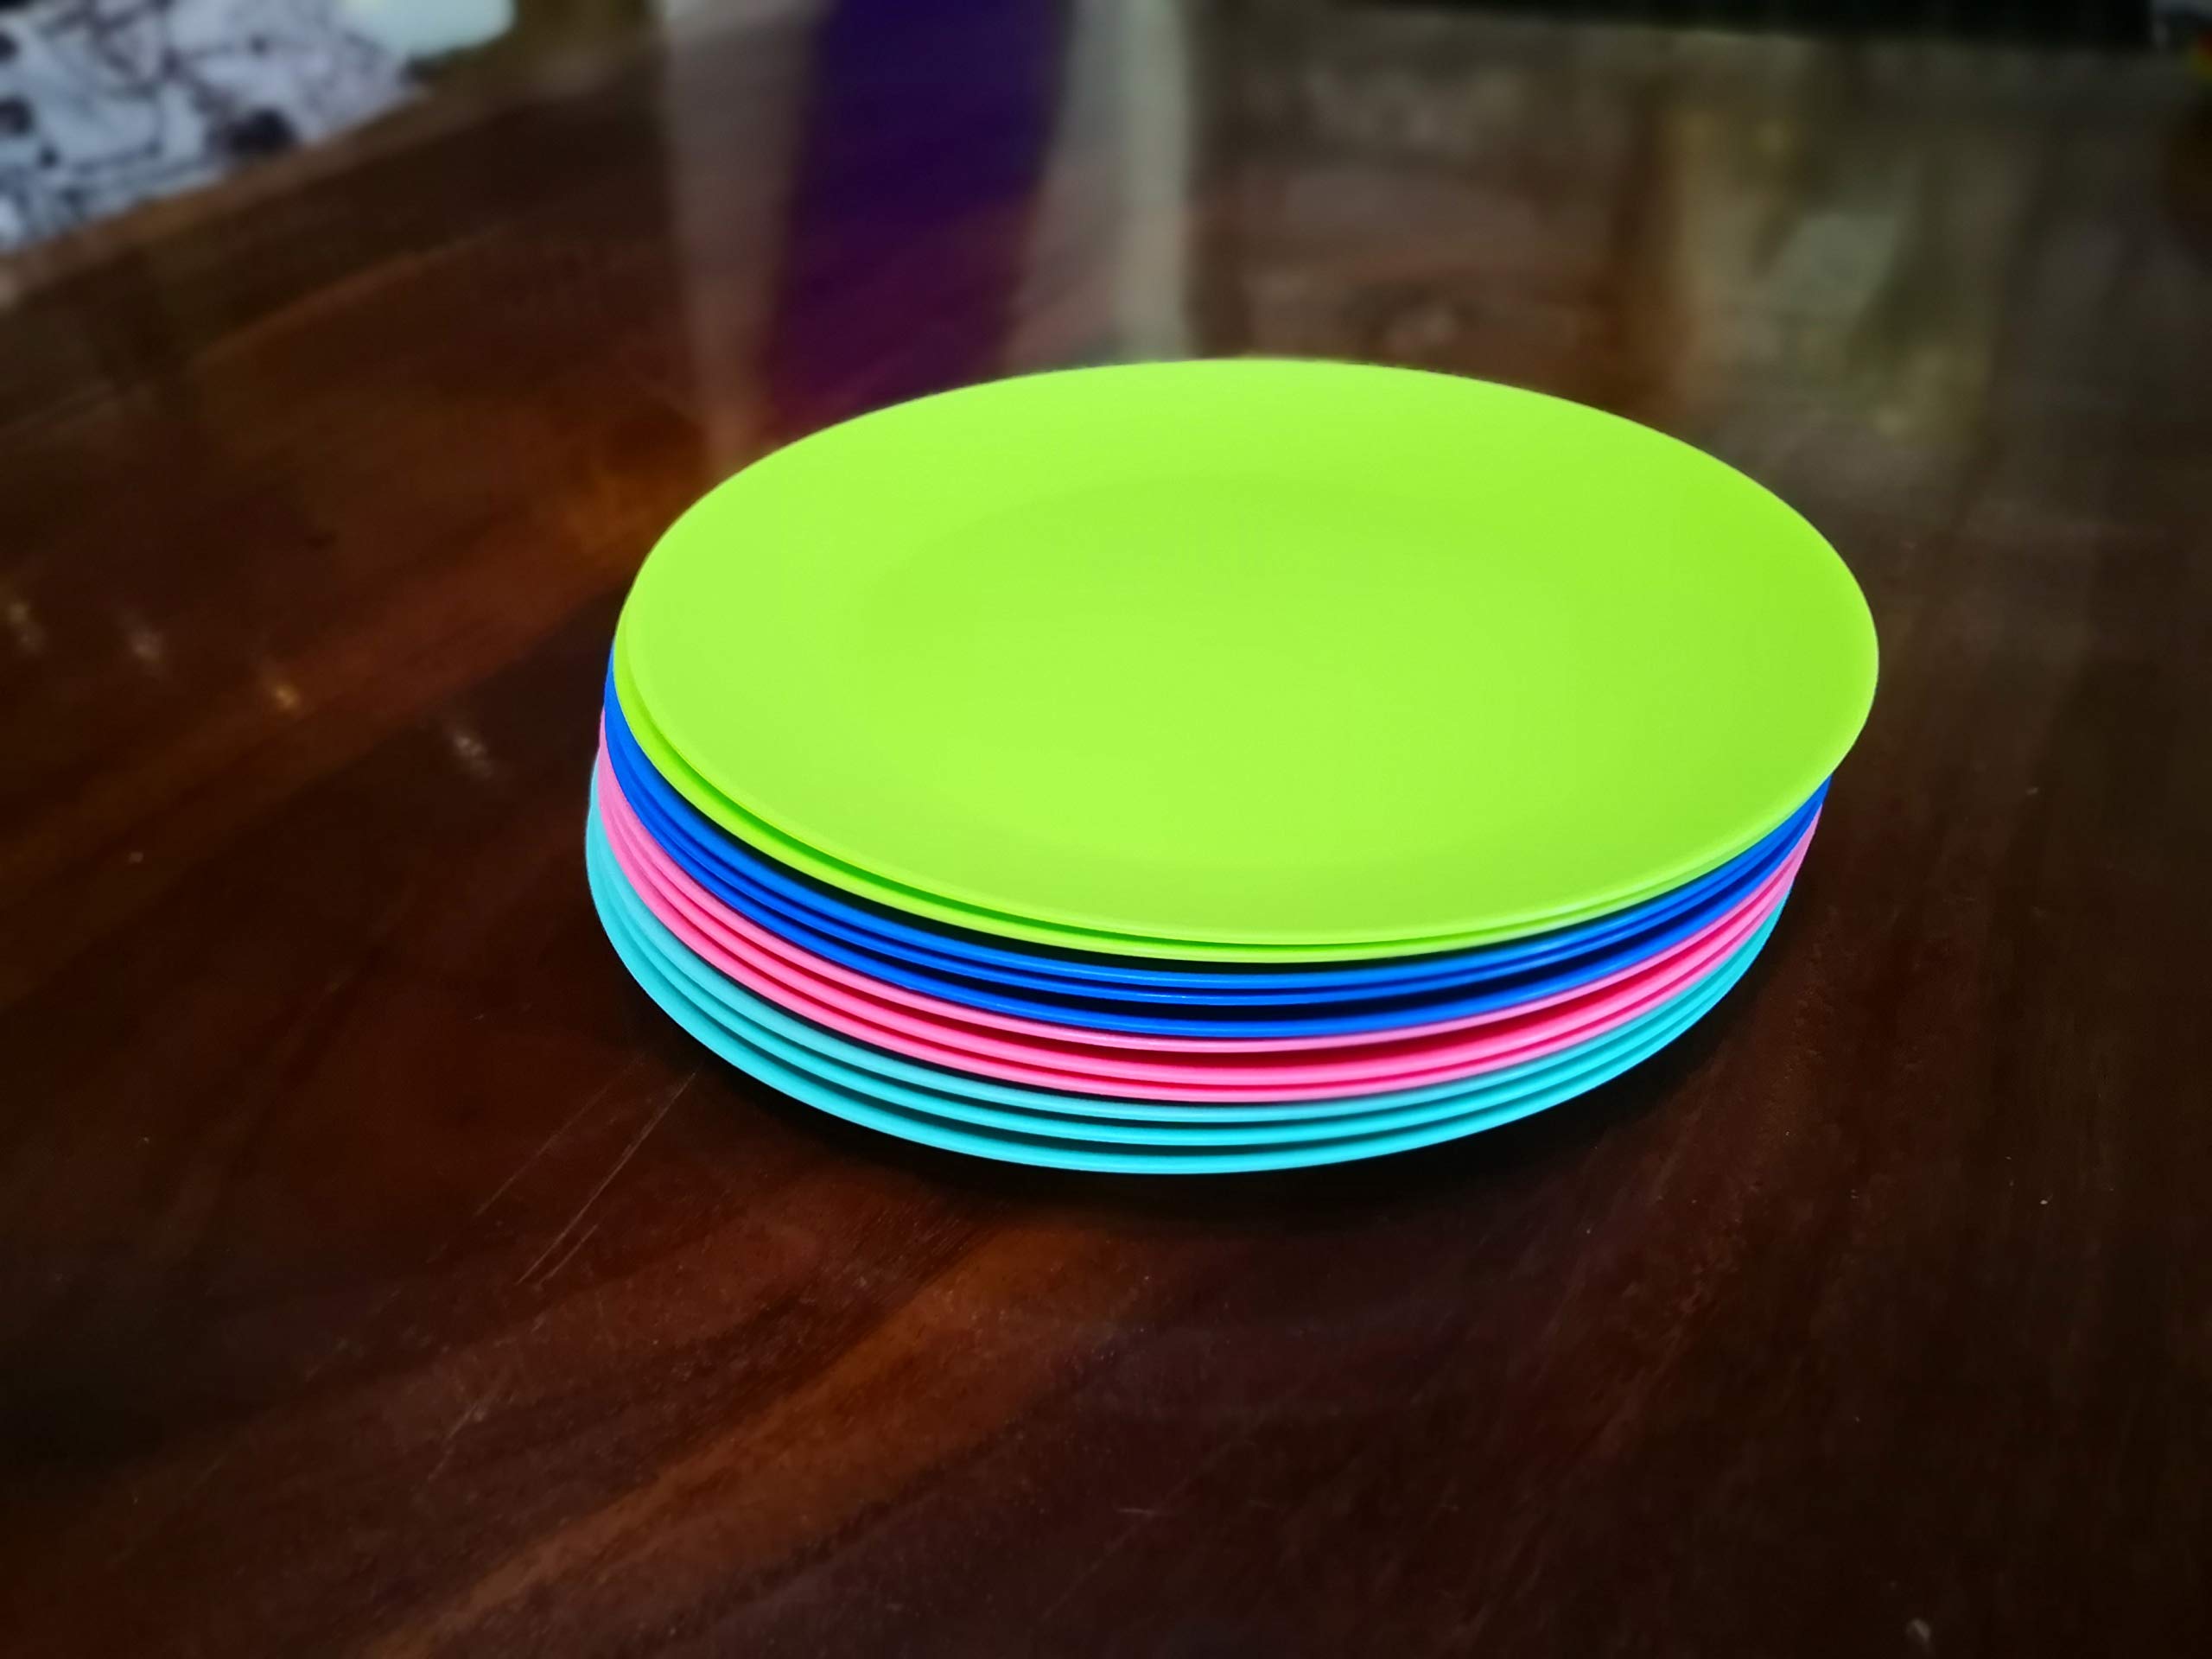 YUYUHUA Plastic Plates Reusable 10 inch - Kitchen Flat Dinner Plates - Dishwasher Safe & Microwavable Plates set of 12 - Kids Stacking Colorful Plates for Indoor Outdoor (BPA Free)